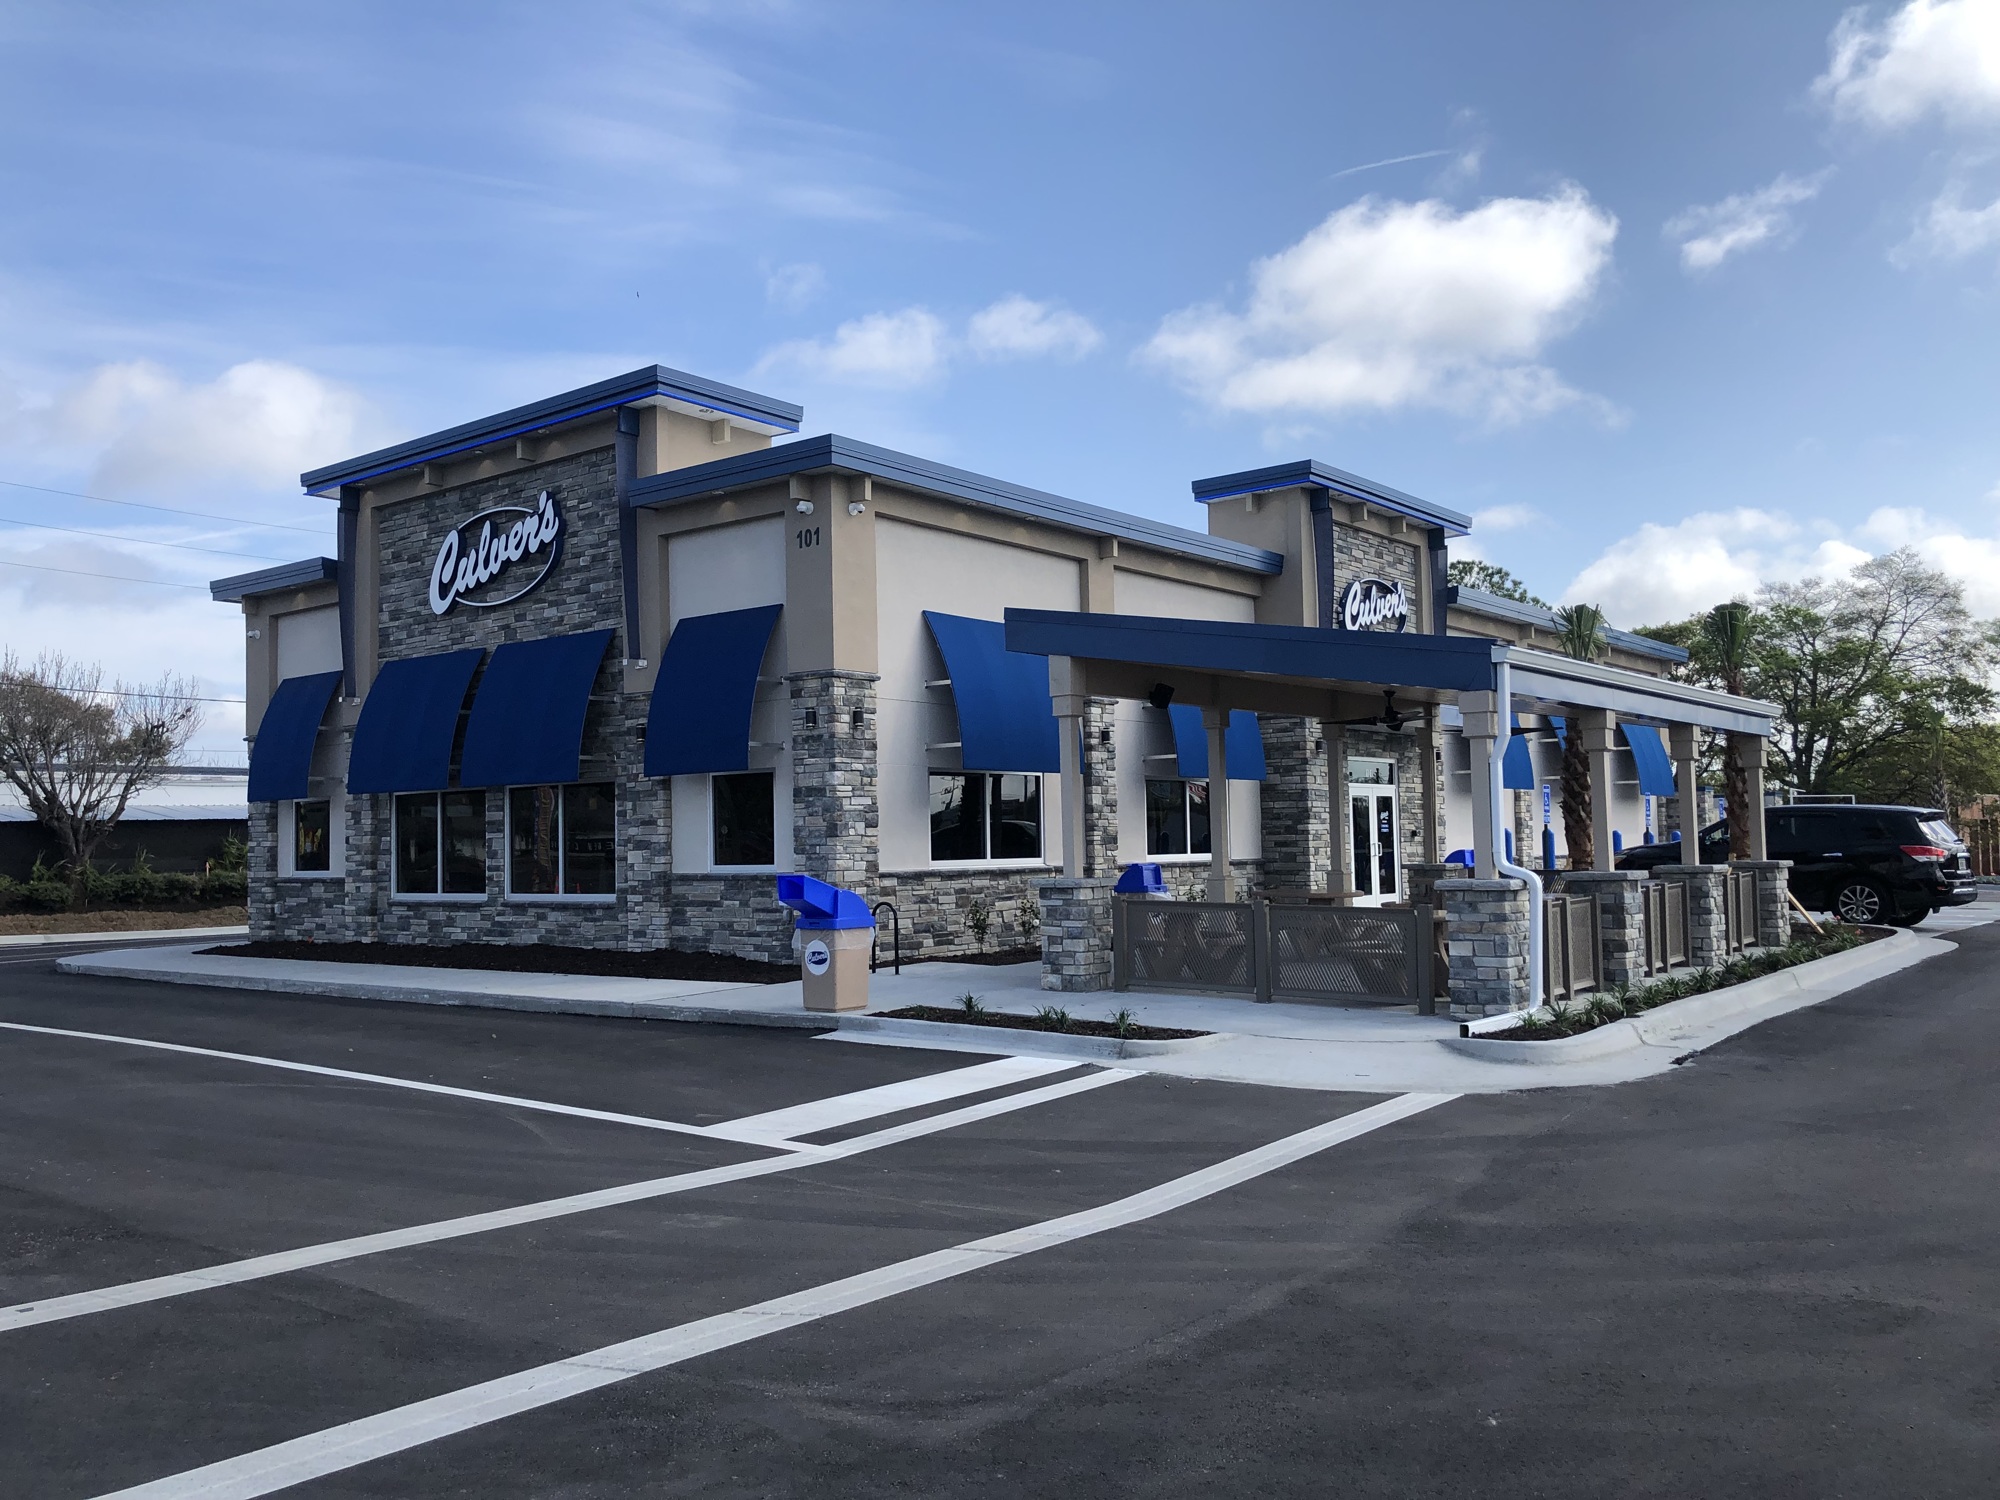 The Monument Road Culver's is next to the bestbet Jacksonville poker room across from Regency Square Mall.